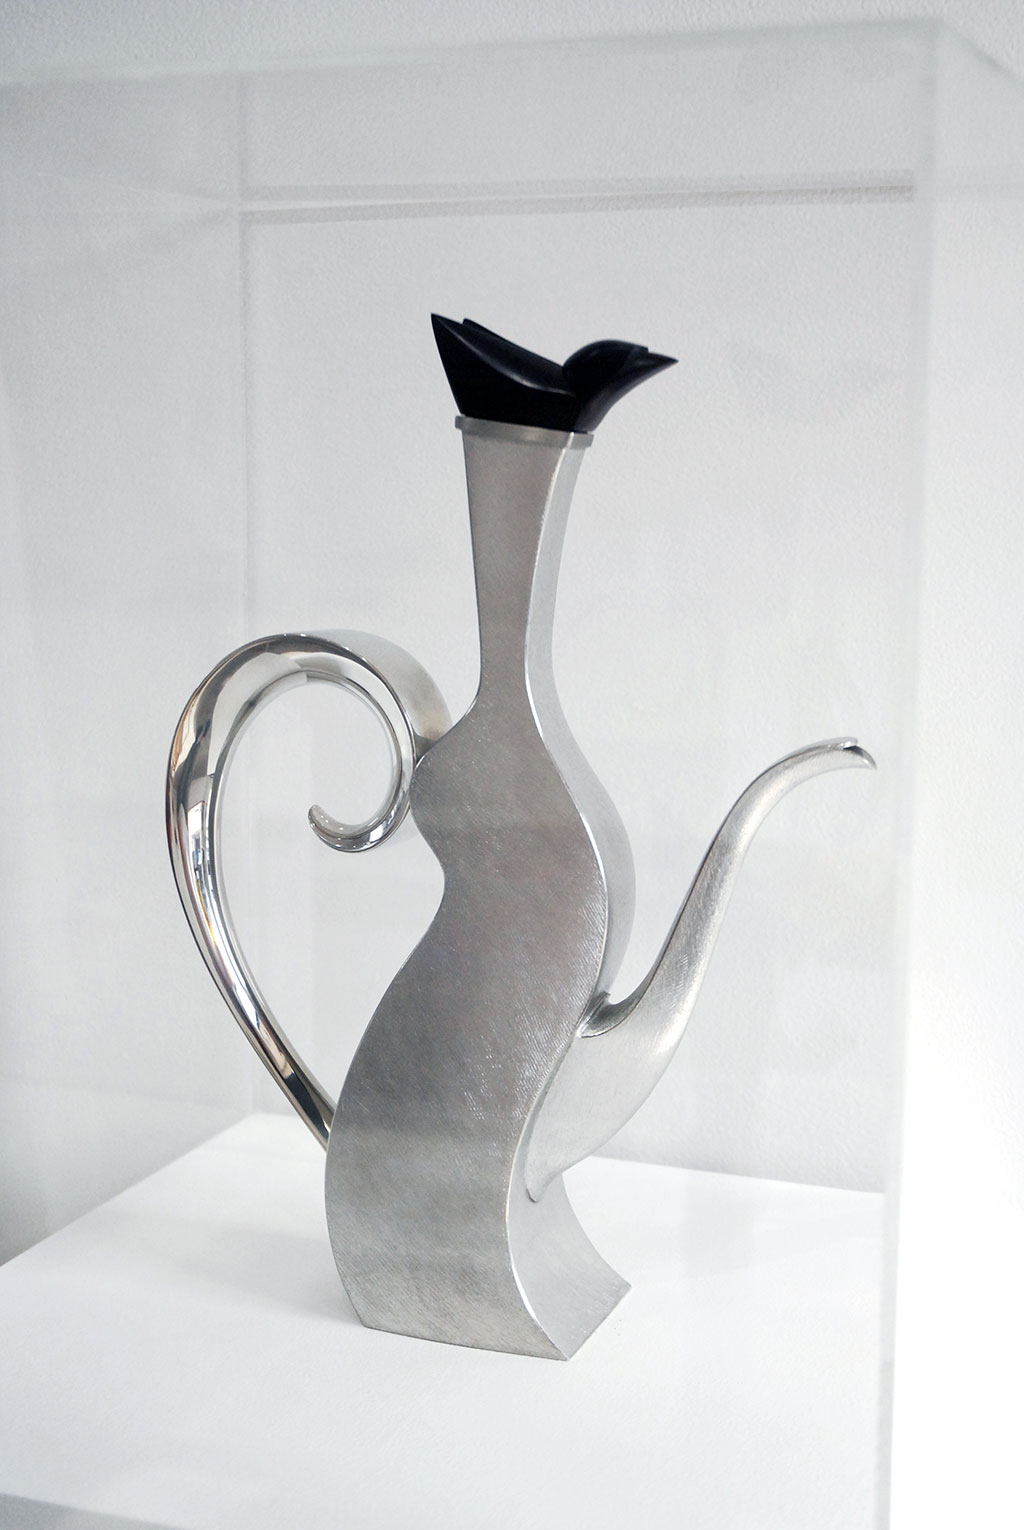 Randy Stromsoe, Santa Rosa, 1992. Pewter and ebony, Silversmith, Rooted: Craft Origins from the California Episode